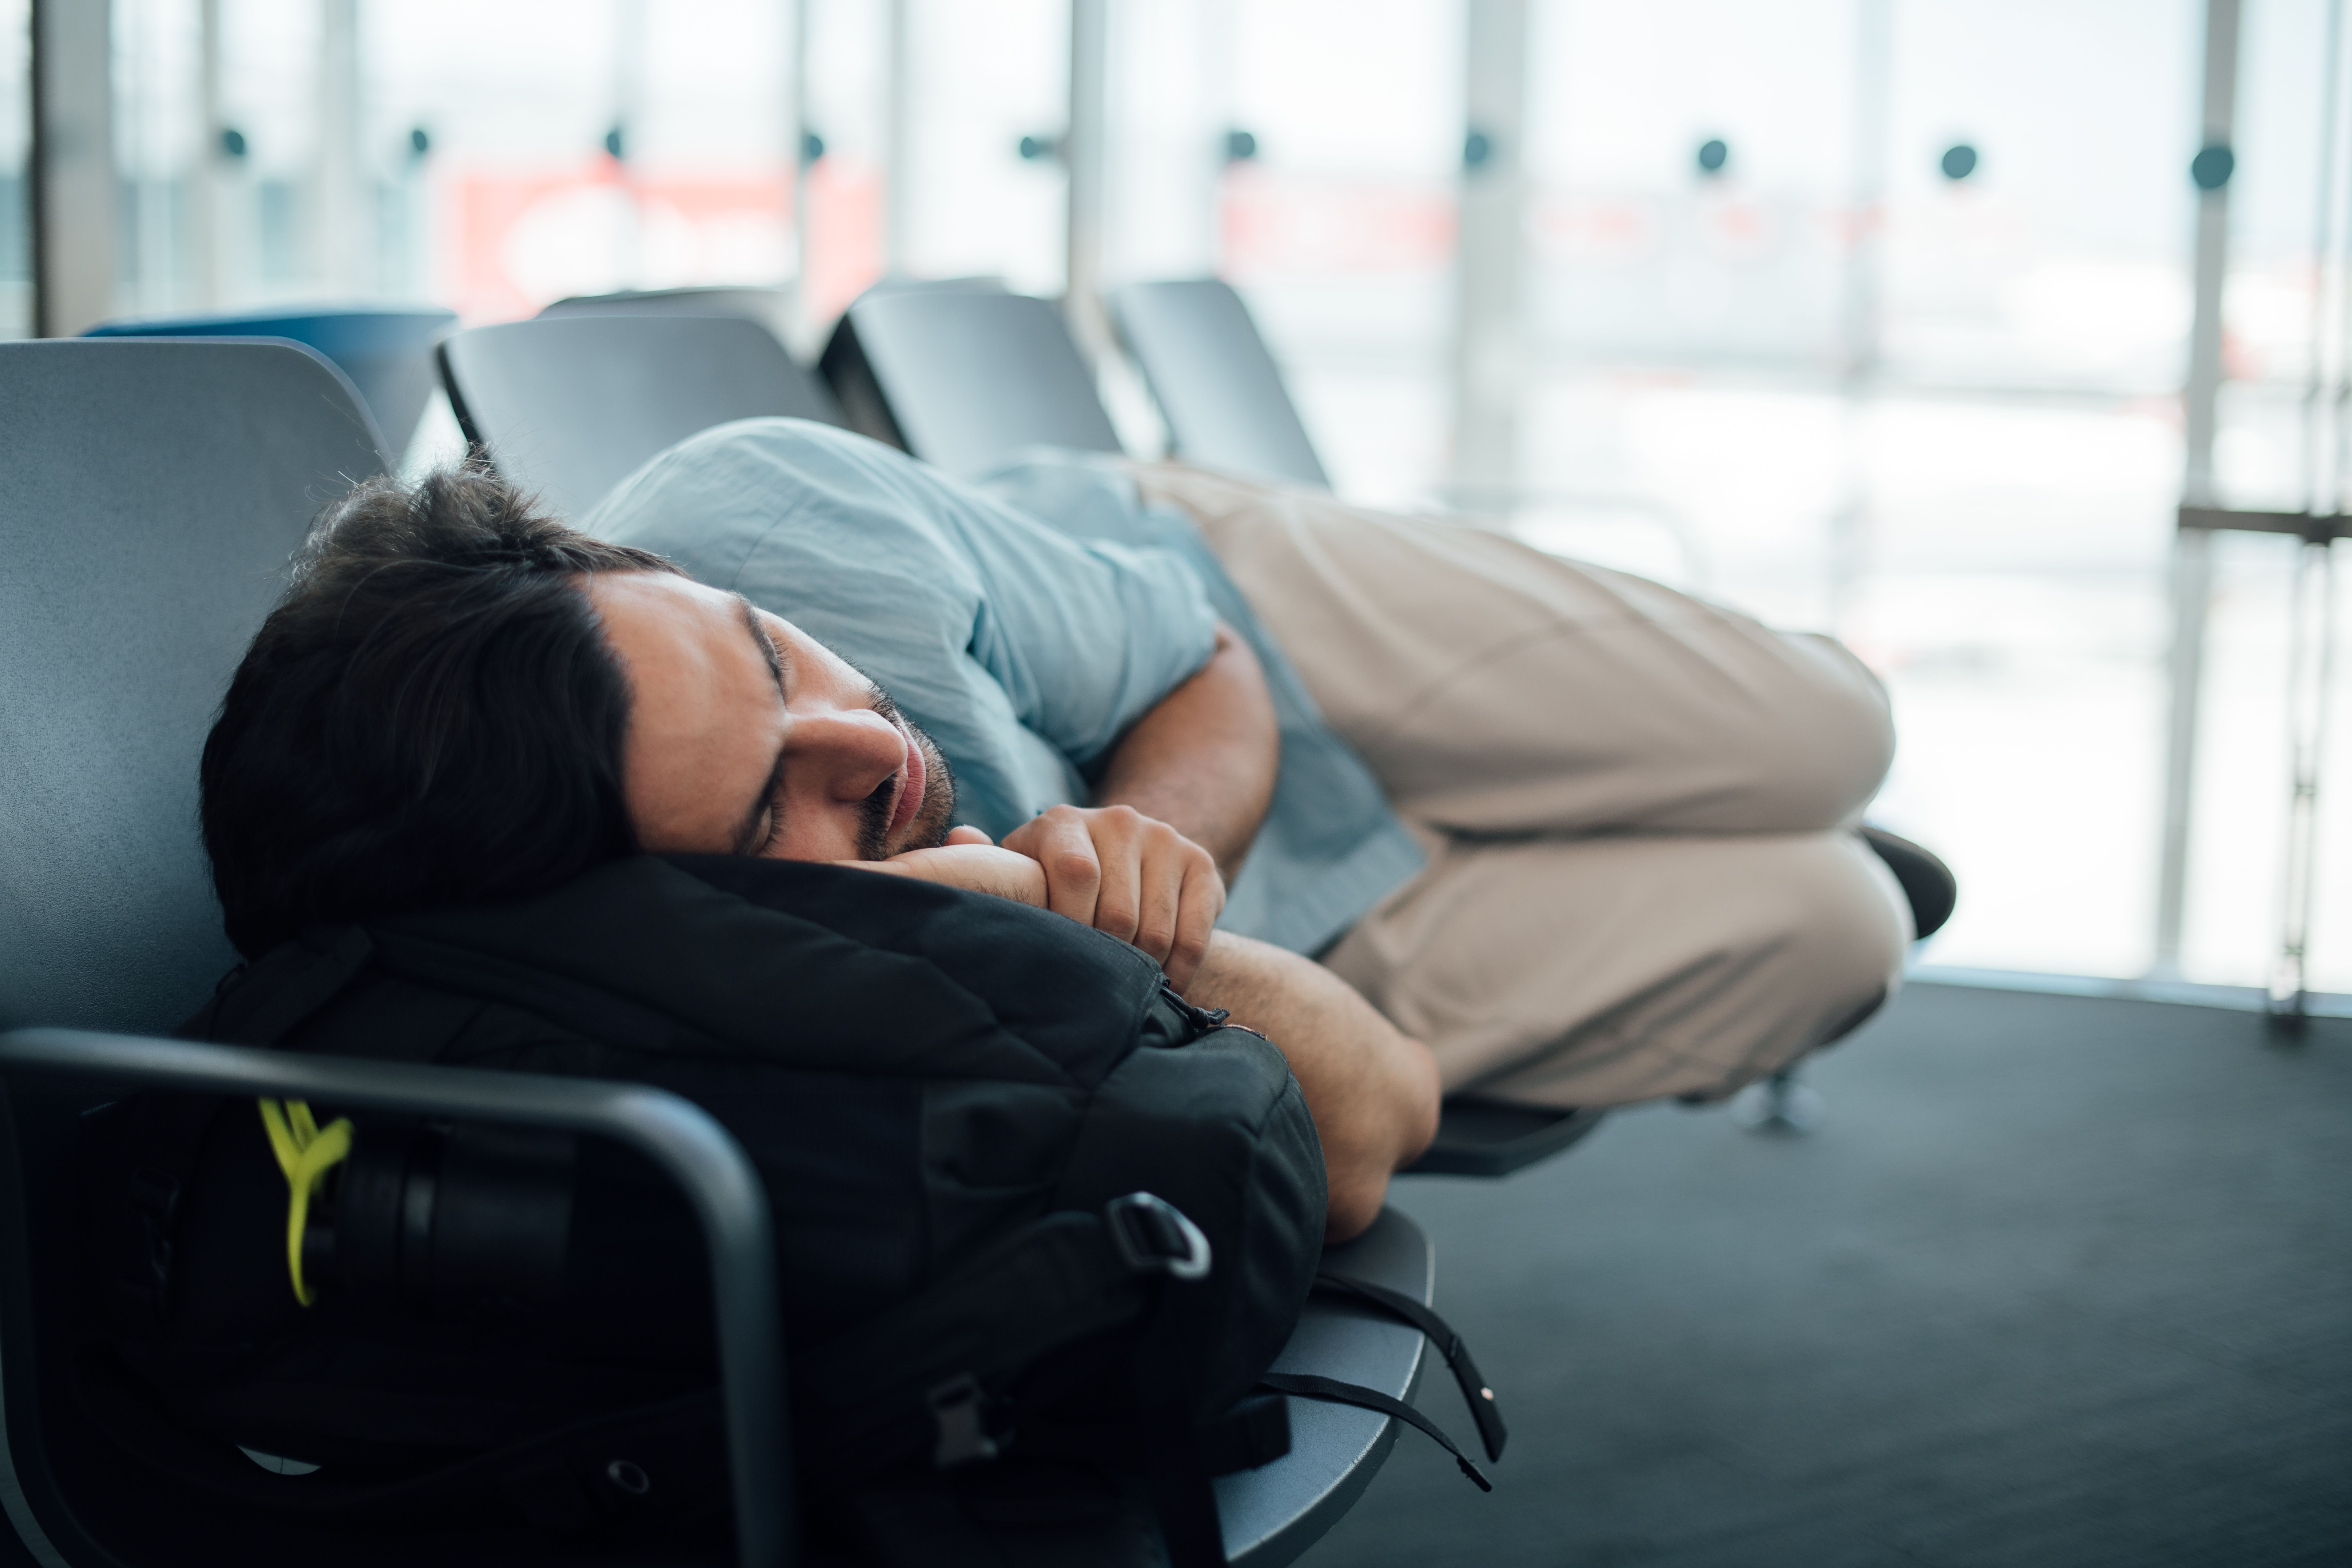 A man sleeping on a few airport gate seats, waiting to board an aircraft.